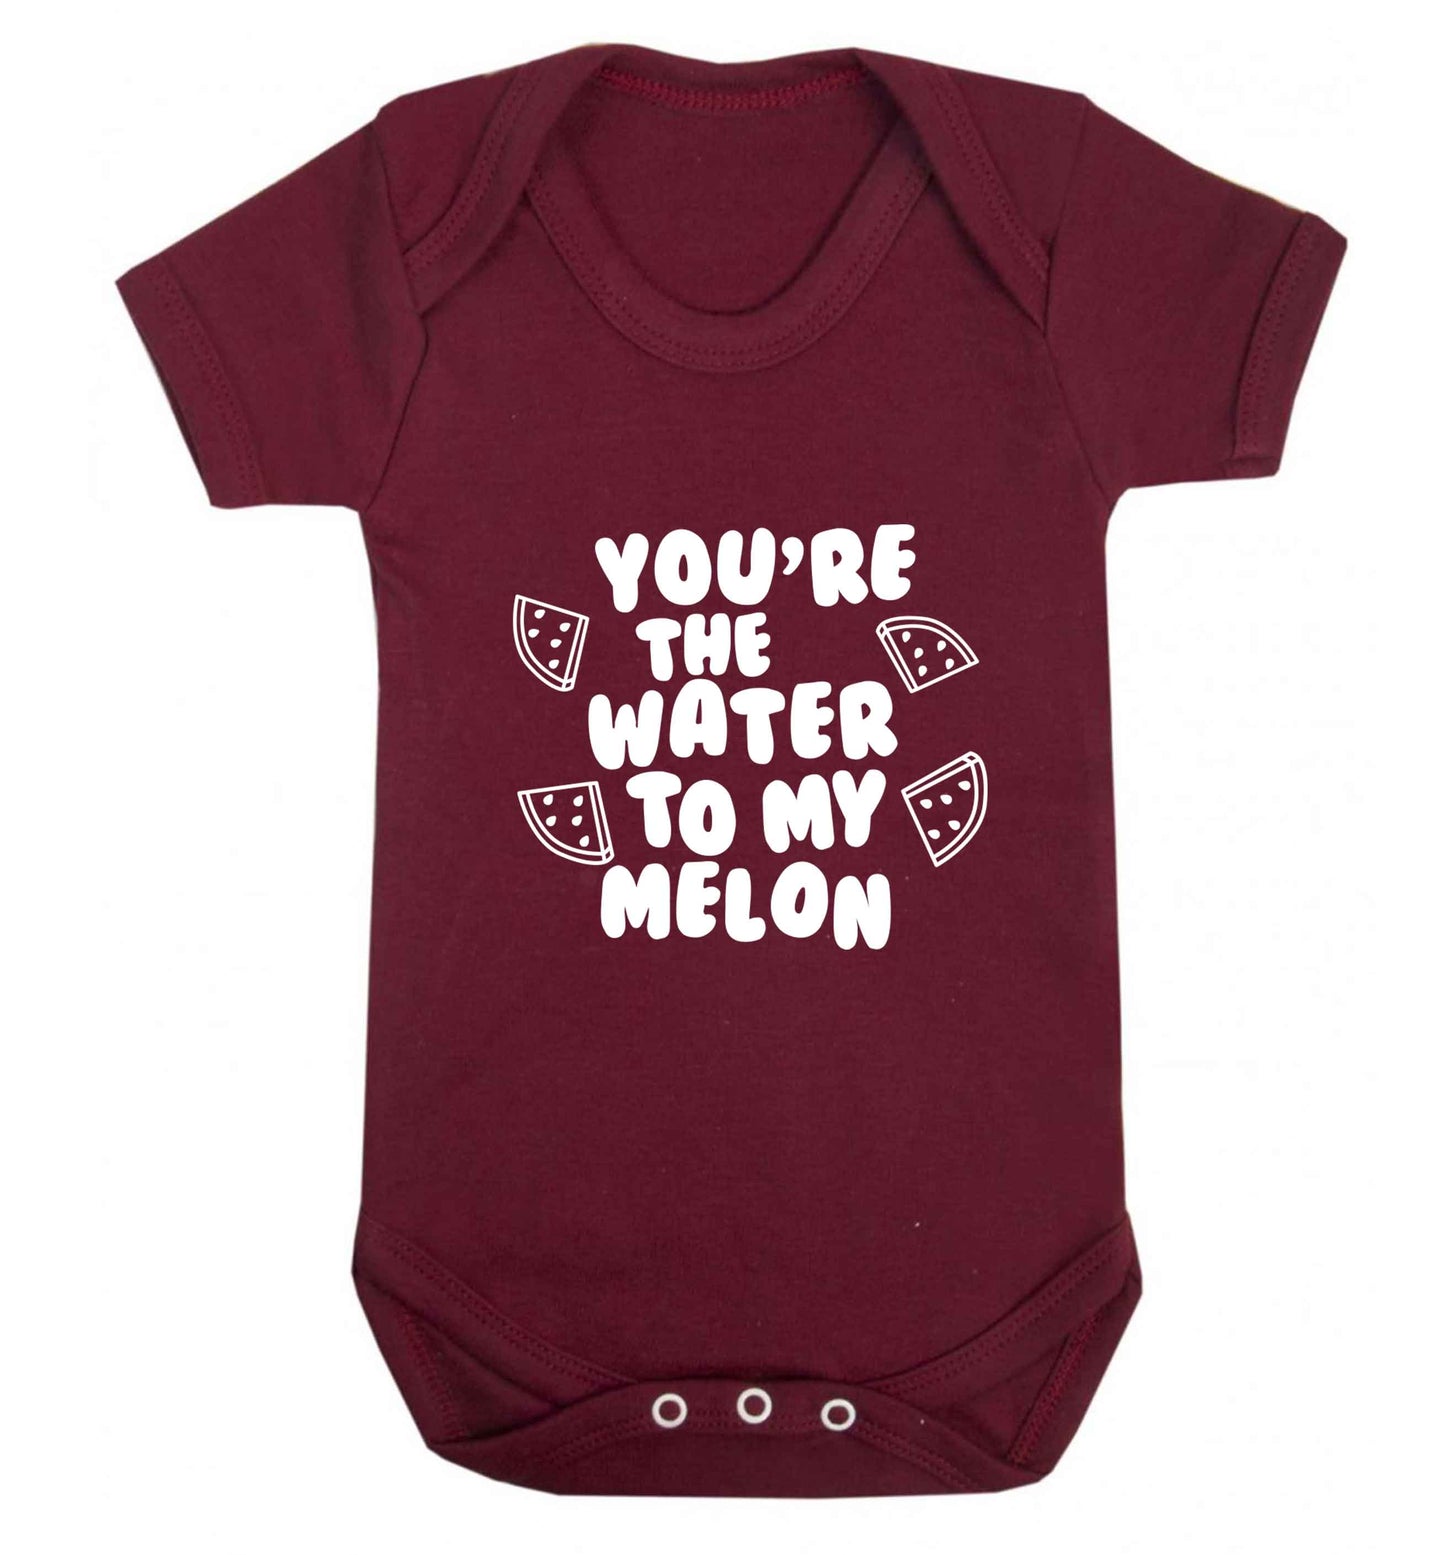 You're the water to my melon baby vest maroon 18-24 months